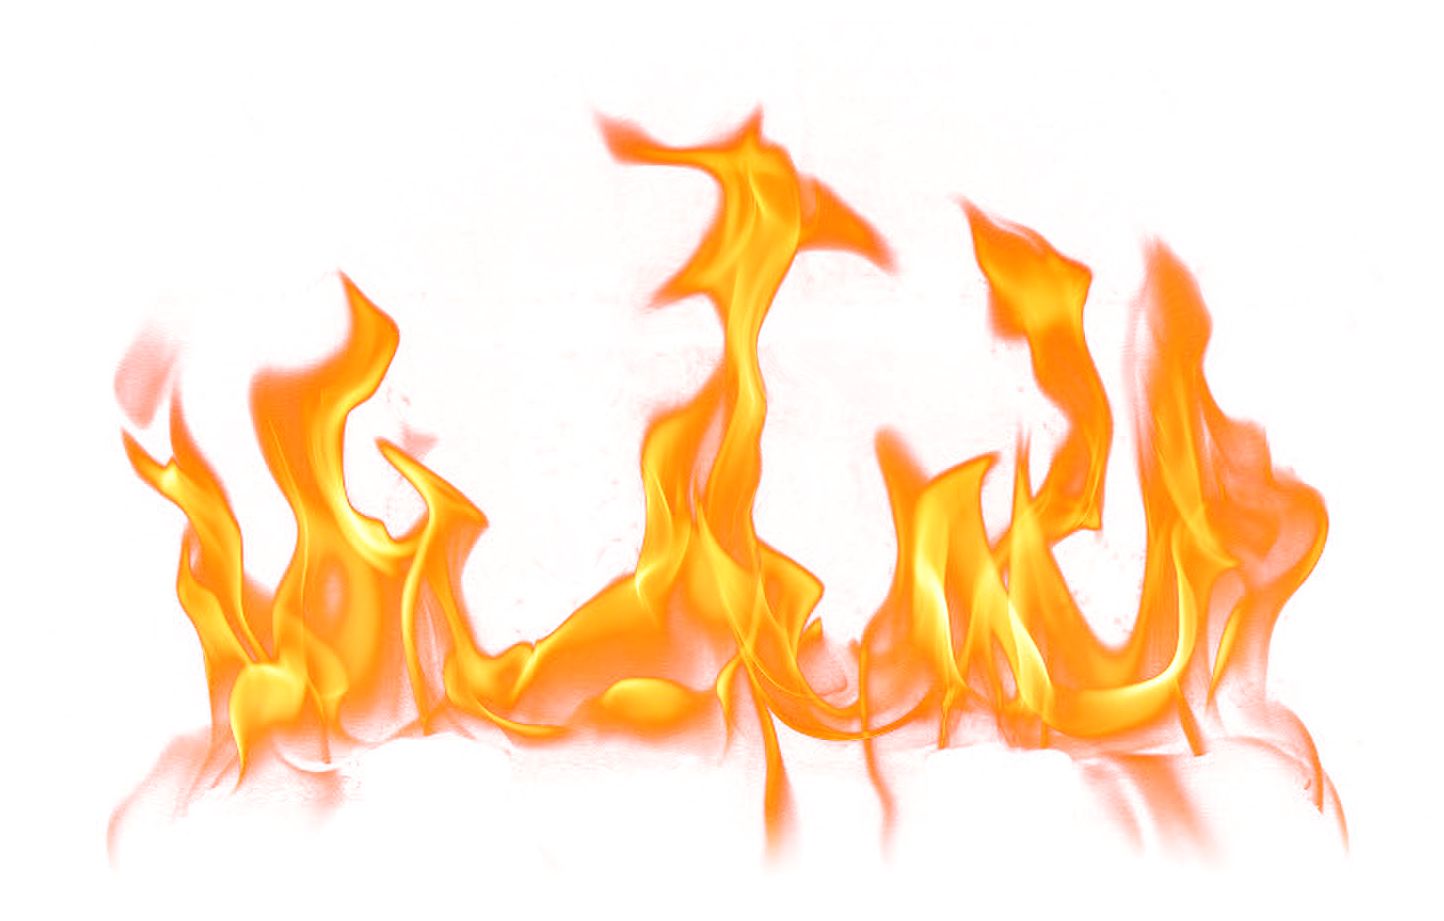 Free Pink Fire Png, Download Free Clip Art, Free Clip Art on